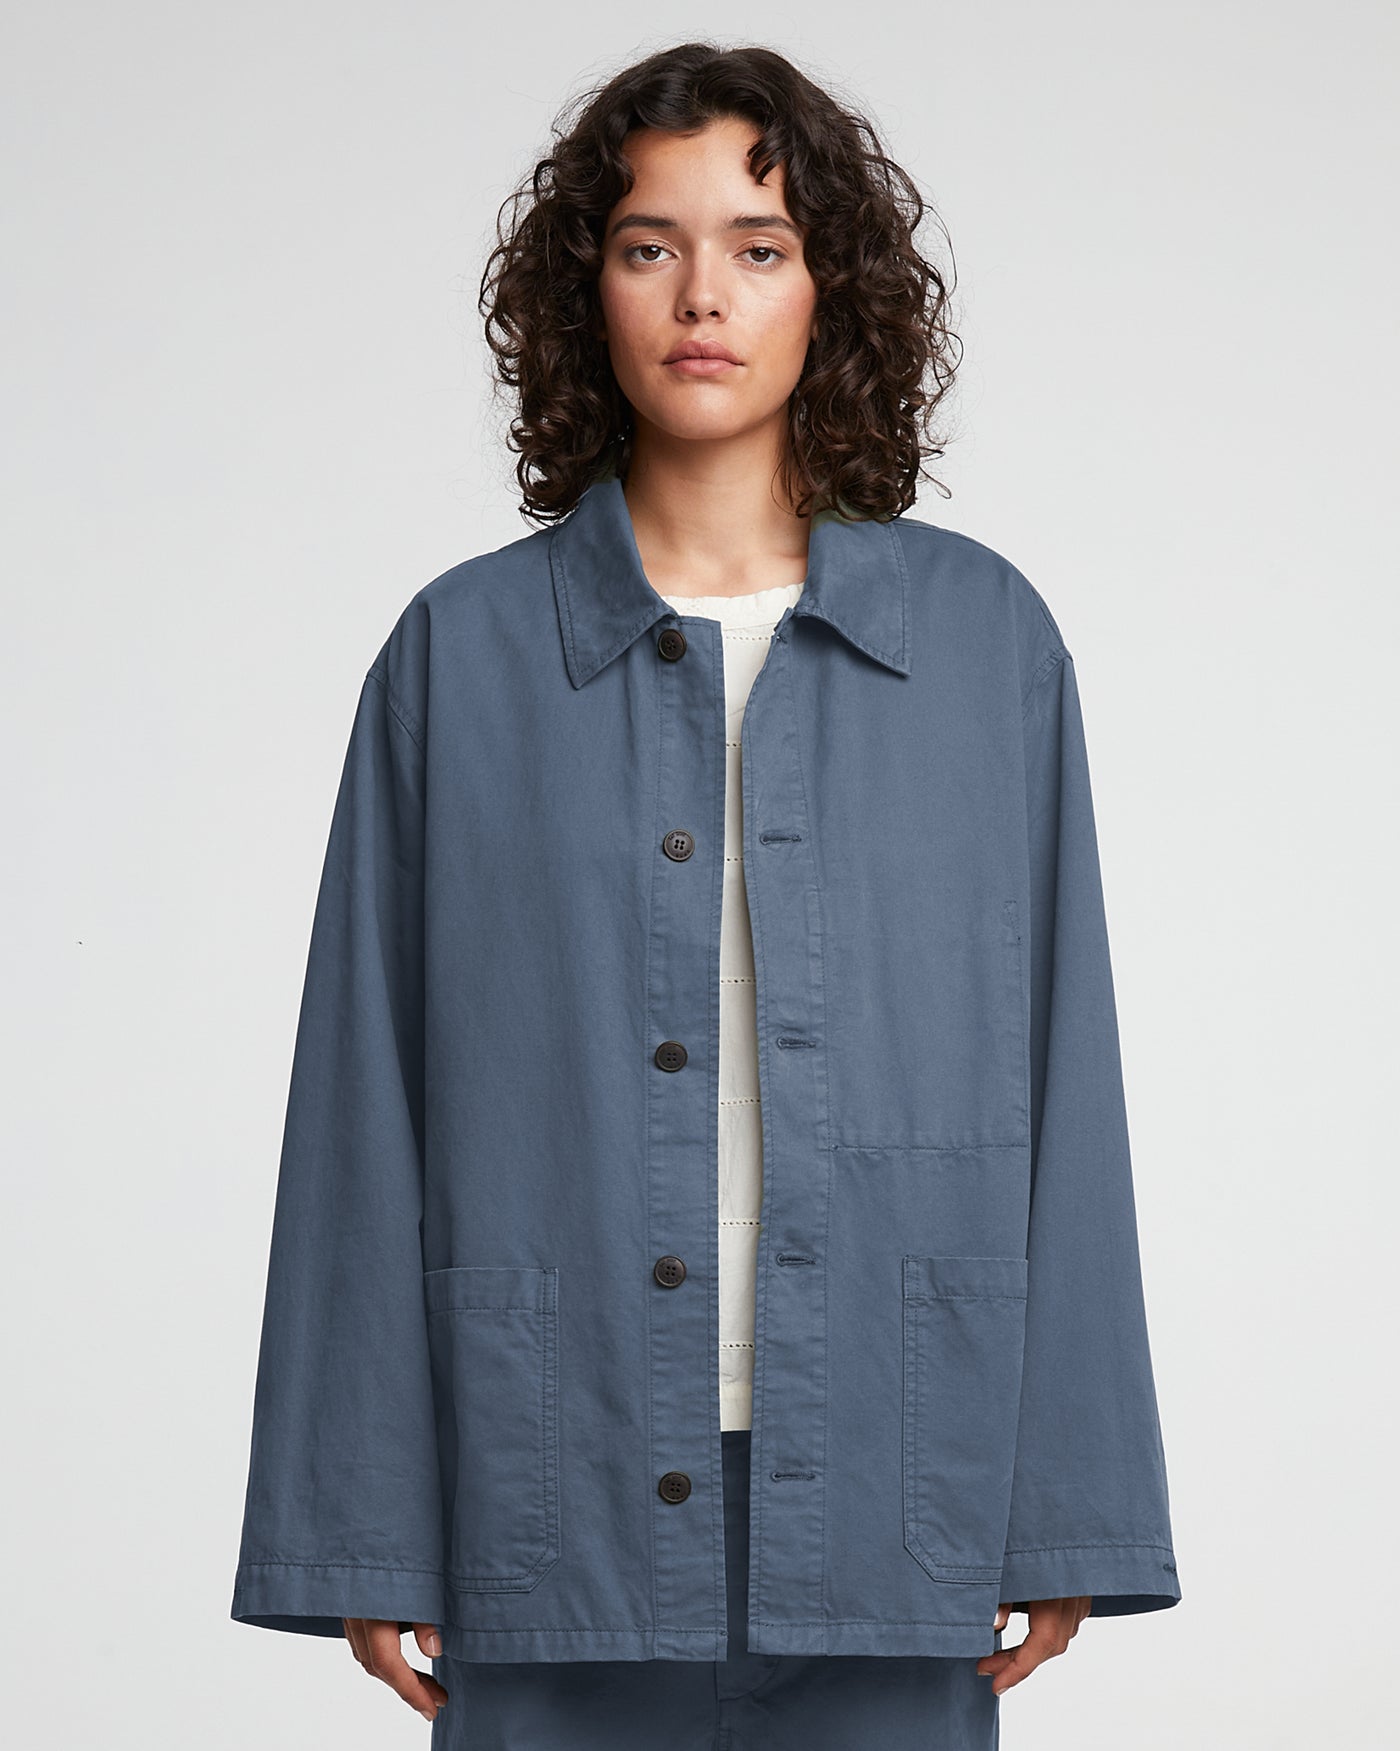 G.o.D Coach Jacket Recycled Cotton Blue Mirage